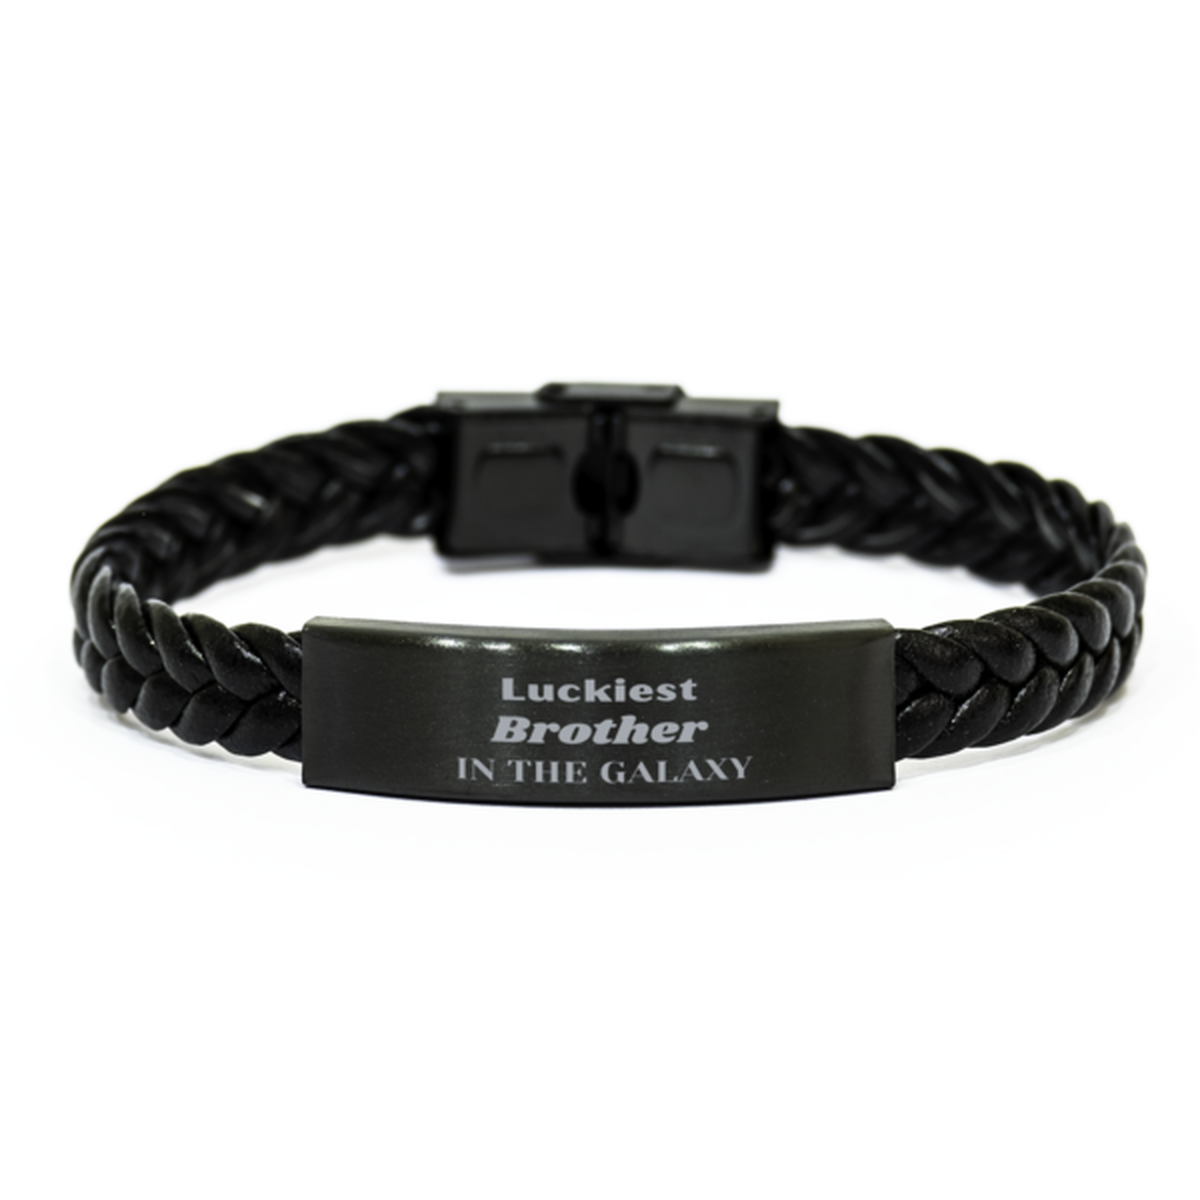 Luckiest Brother in the Galaxy, To My Brother Engraved Gifts, Christmas Brother Braided Leather Bracelet Gifts, X-mas Birthday Unique Gifts For Brother Men Women